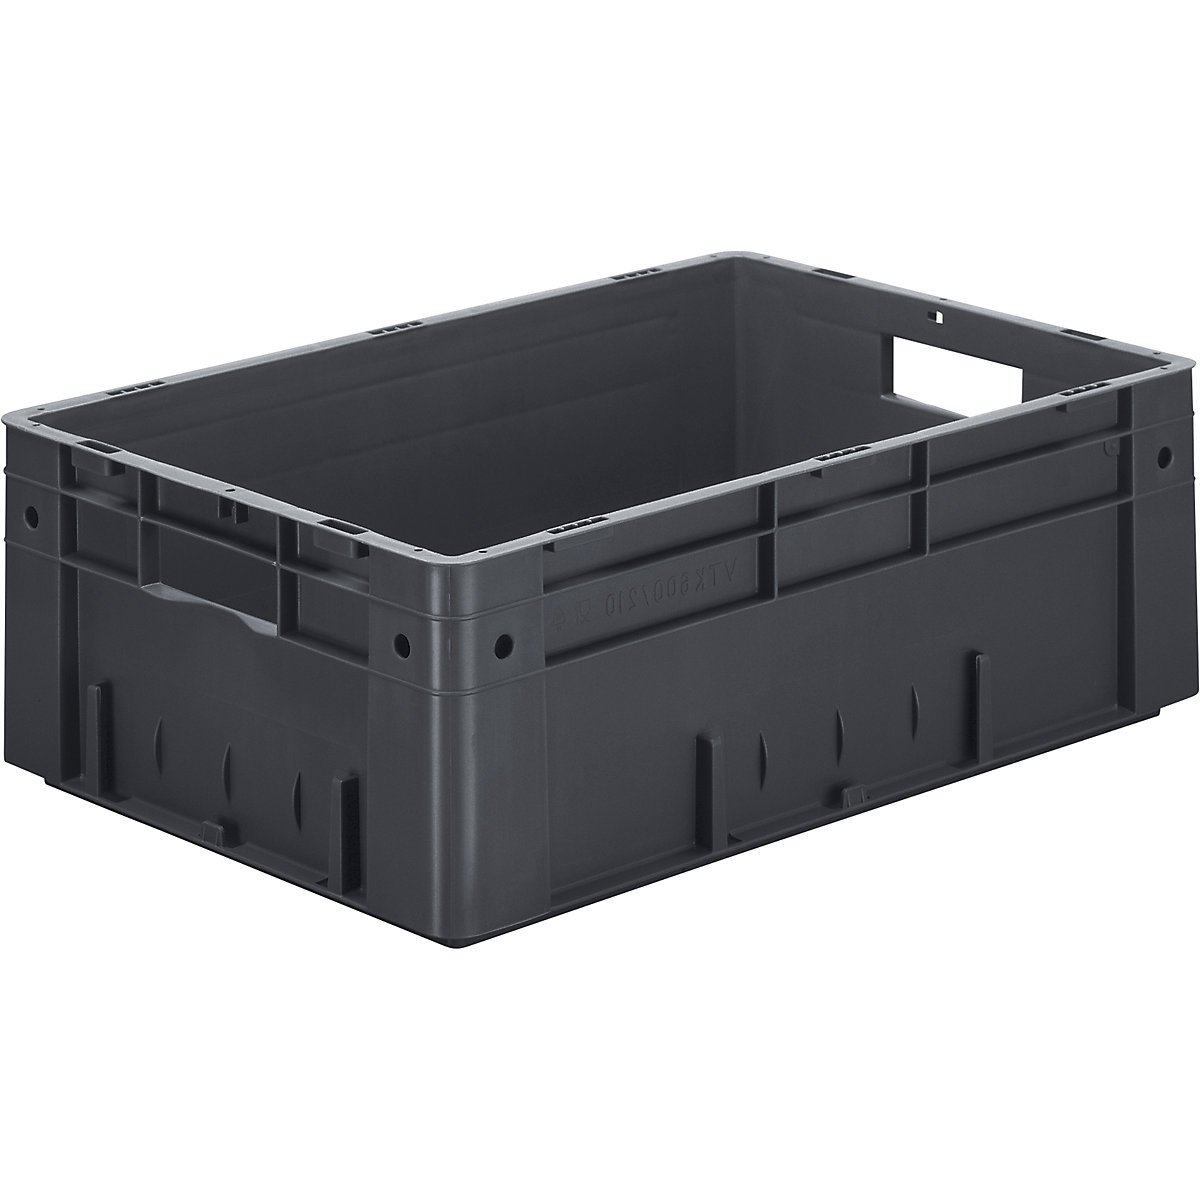 ESD heavy duty EURO-size container, made of polypropylene, LxWxH 600 x 400 x 210 mm, pack of 2-9